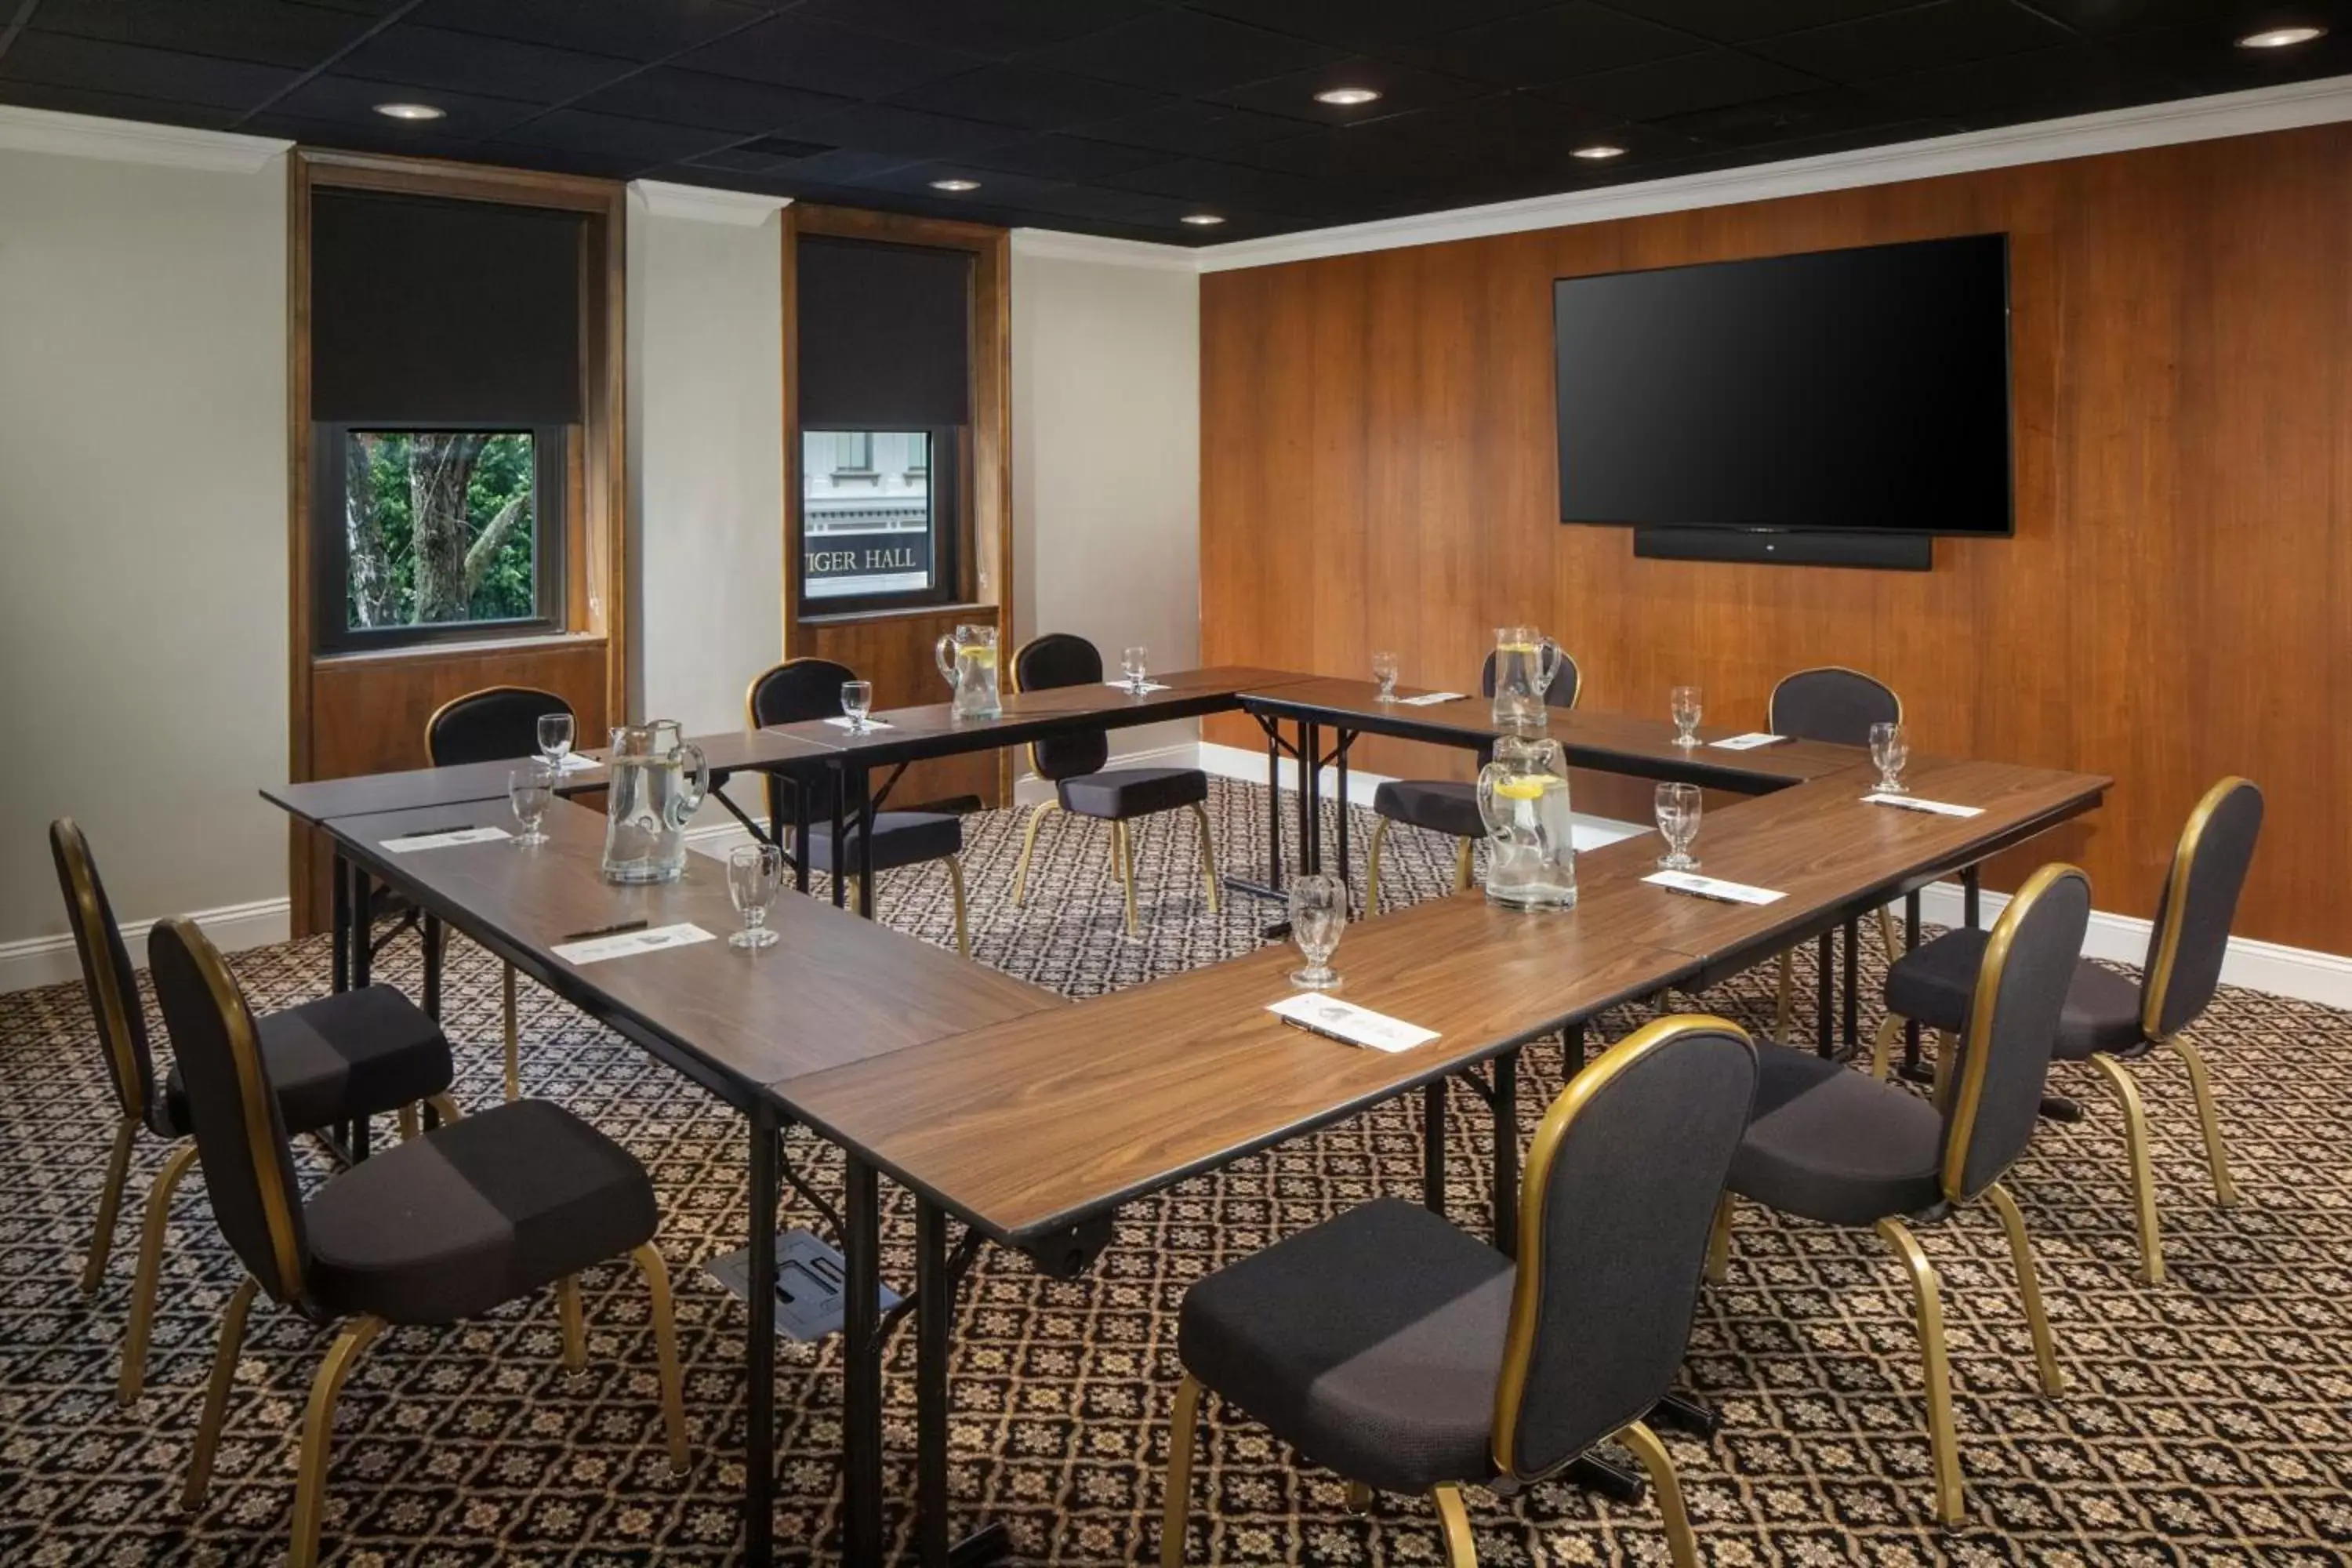 Meeting/conference room in Historic Hotel Bethlehem